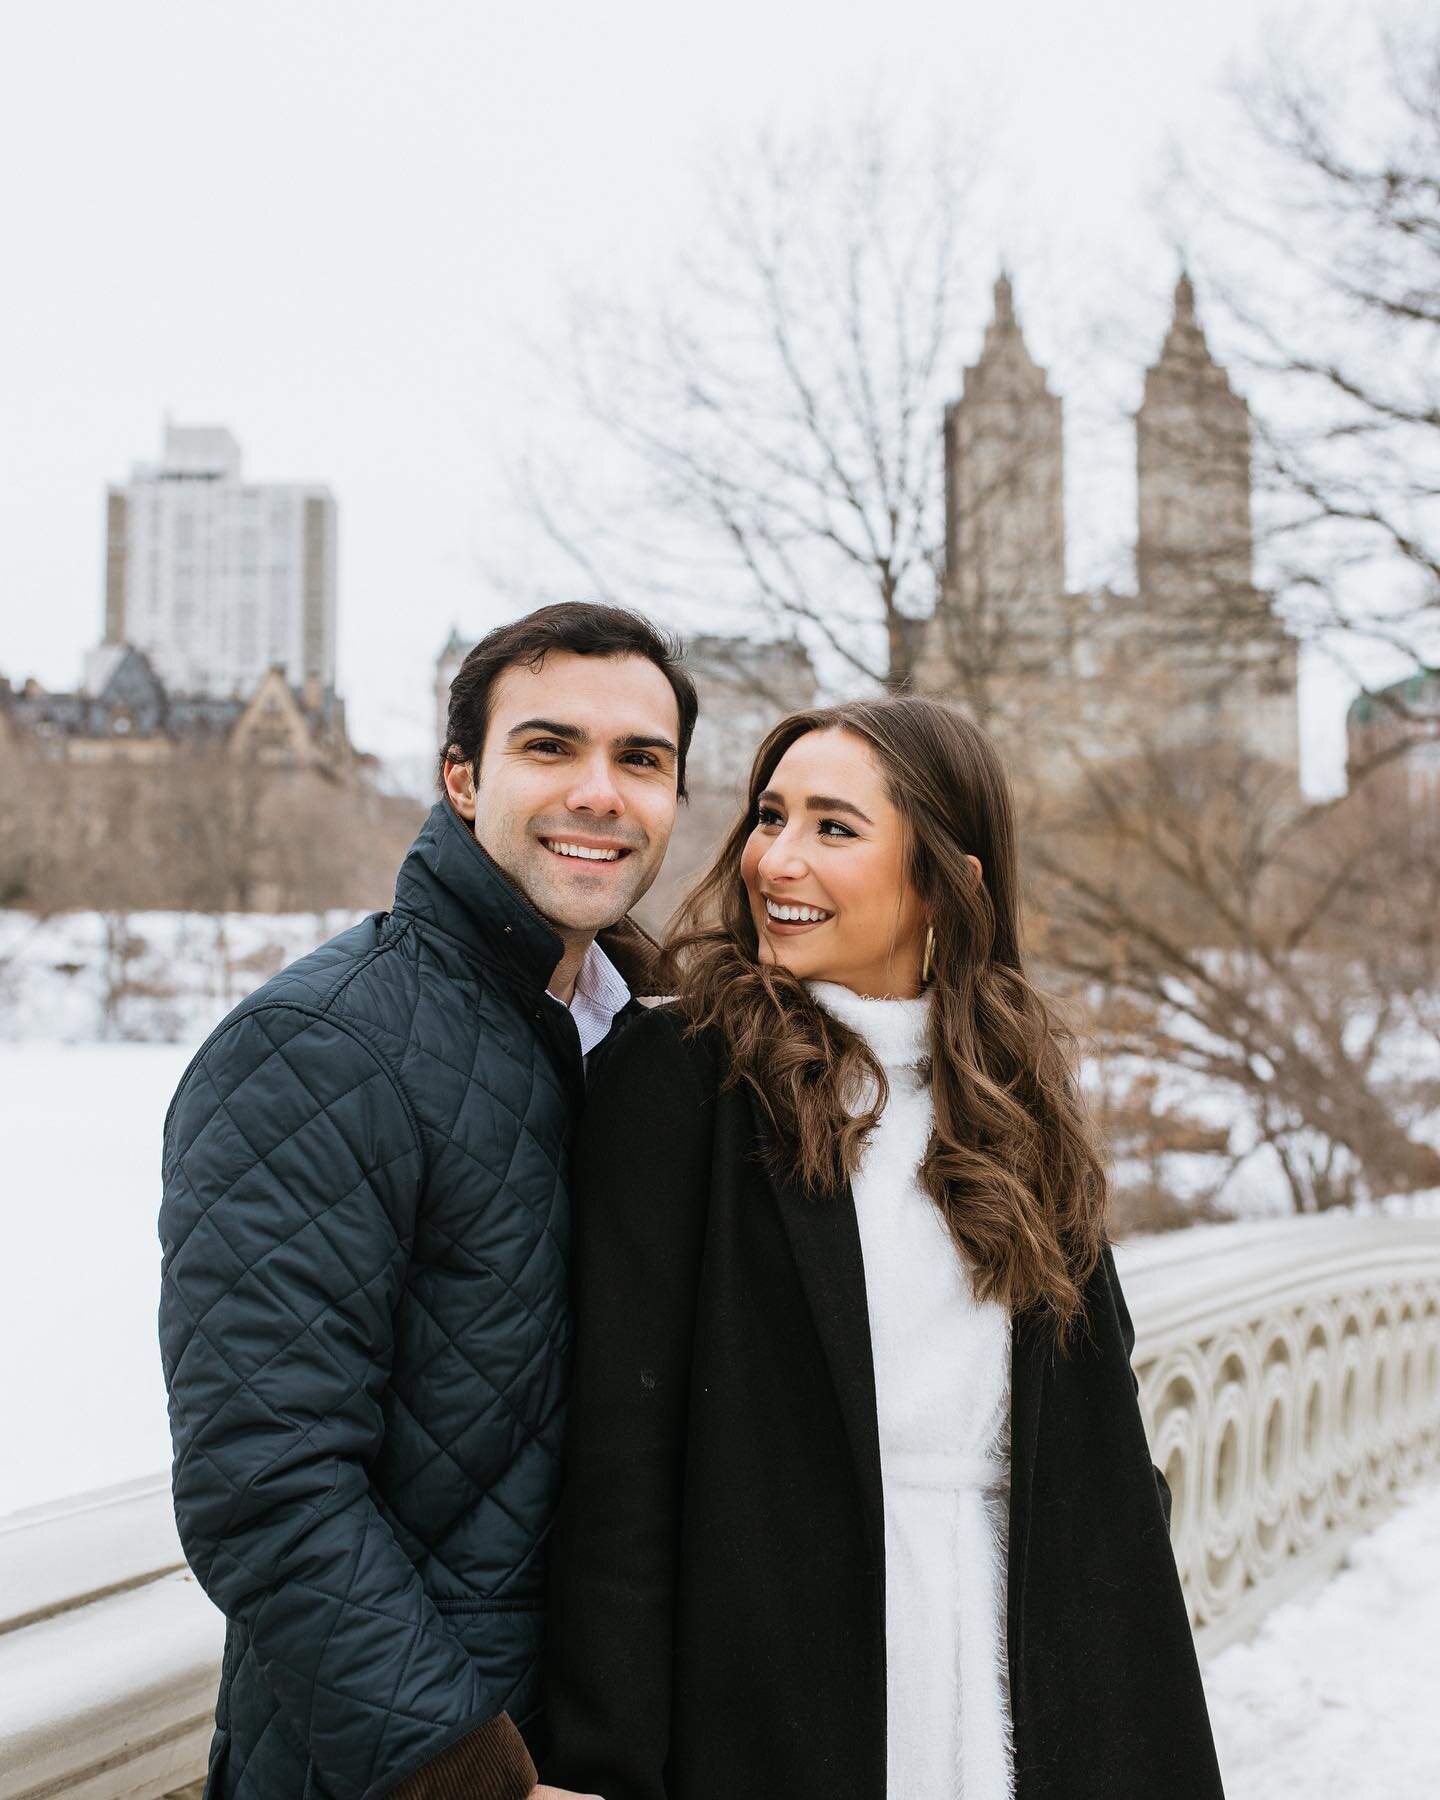 A sneak peek from Lauren + Chad&rsquo;s engagement session this past weekend😍😍
.
.
.
.
#centralparknyc #centralparkengagementsession #nycphotographer #nycphotography #newyorkphotographer #newyorkweddingphotographer #nycweddingphotographer #nycengag